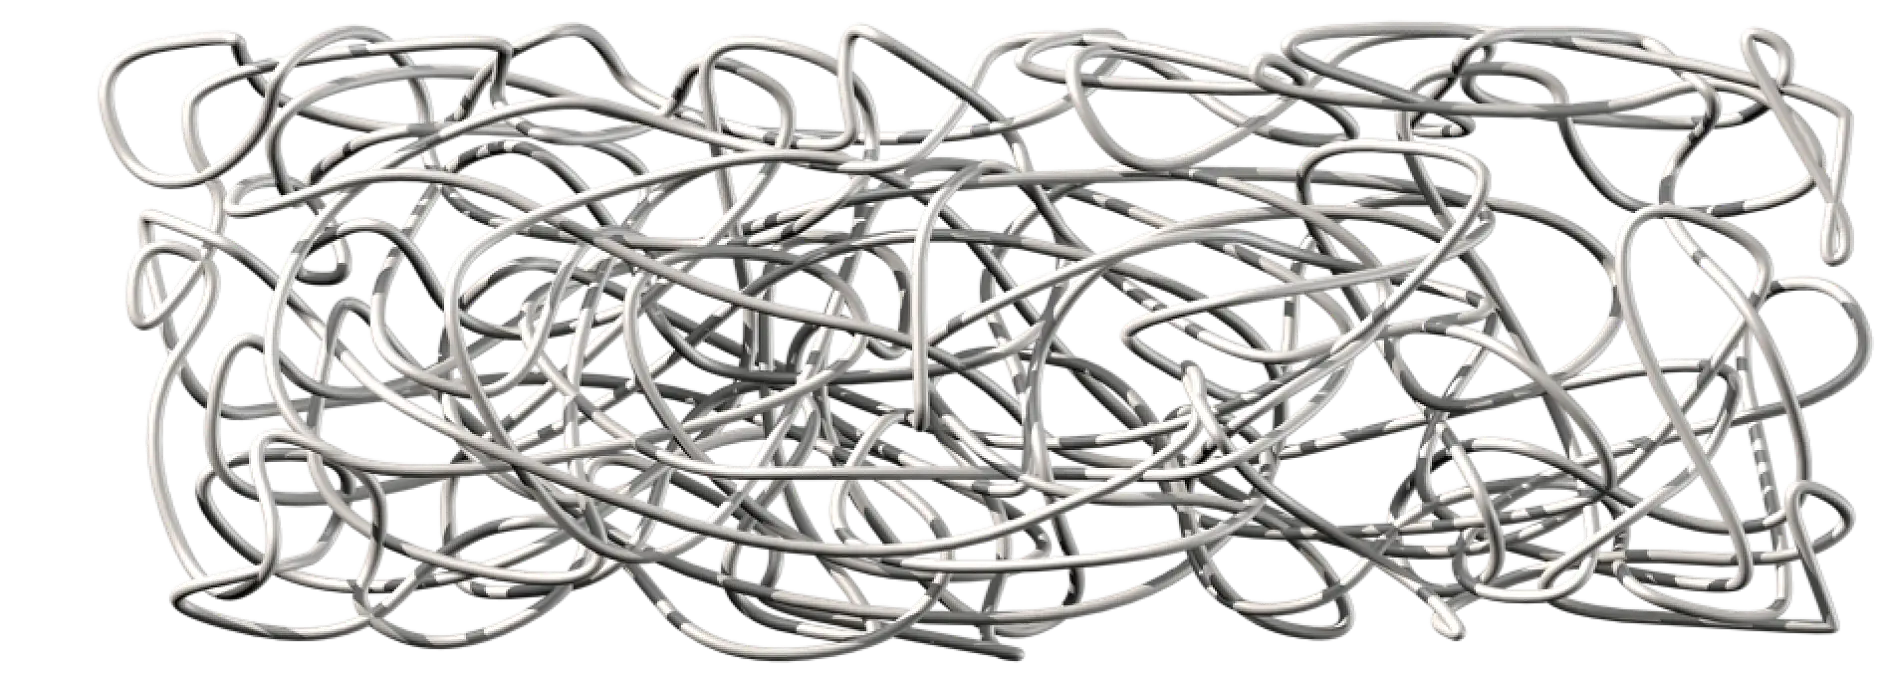 Natural rubber consists of extremely long polymere chains that are entangled, not connected